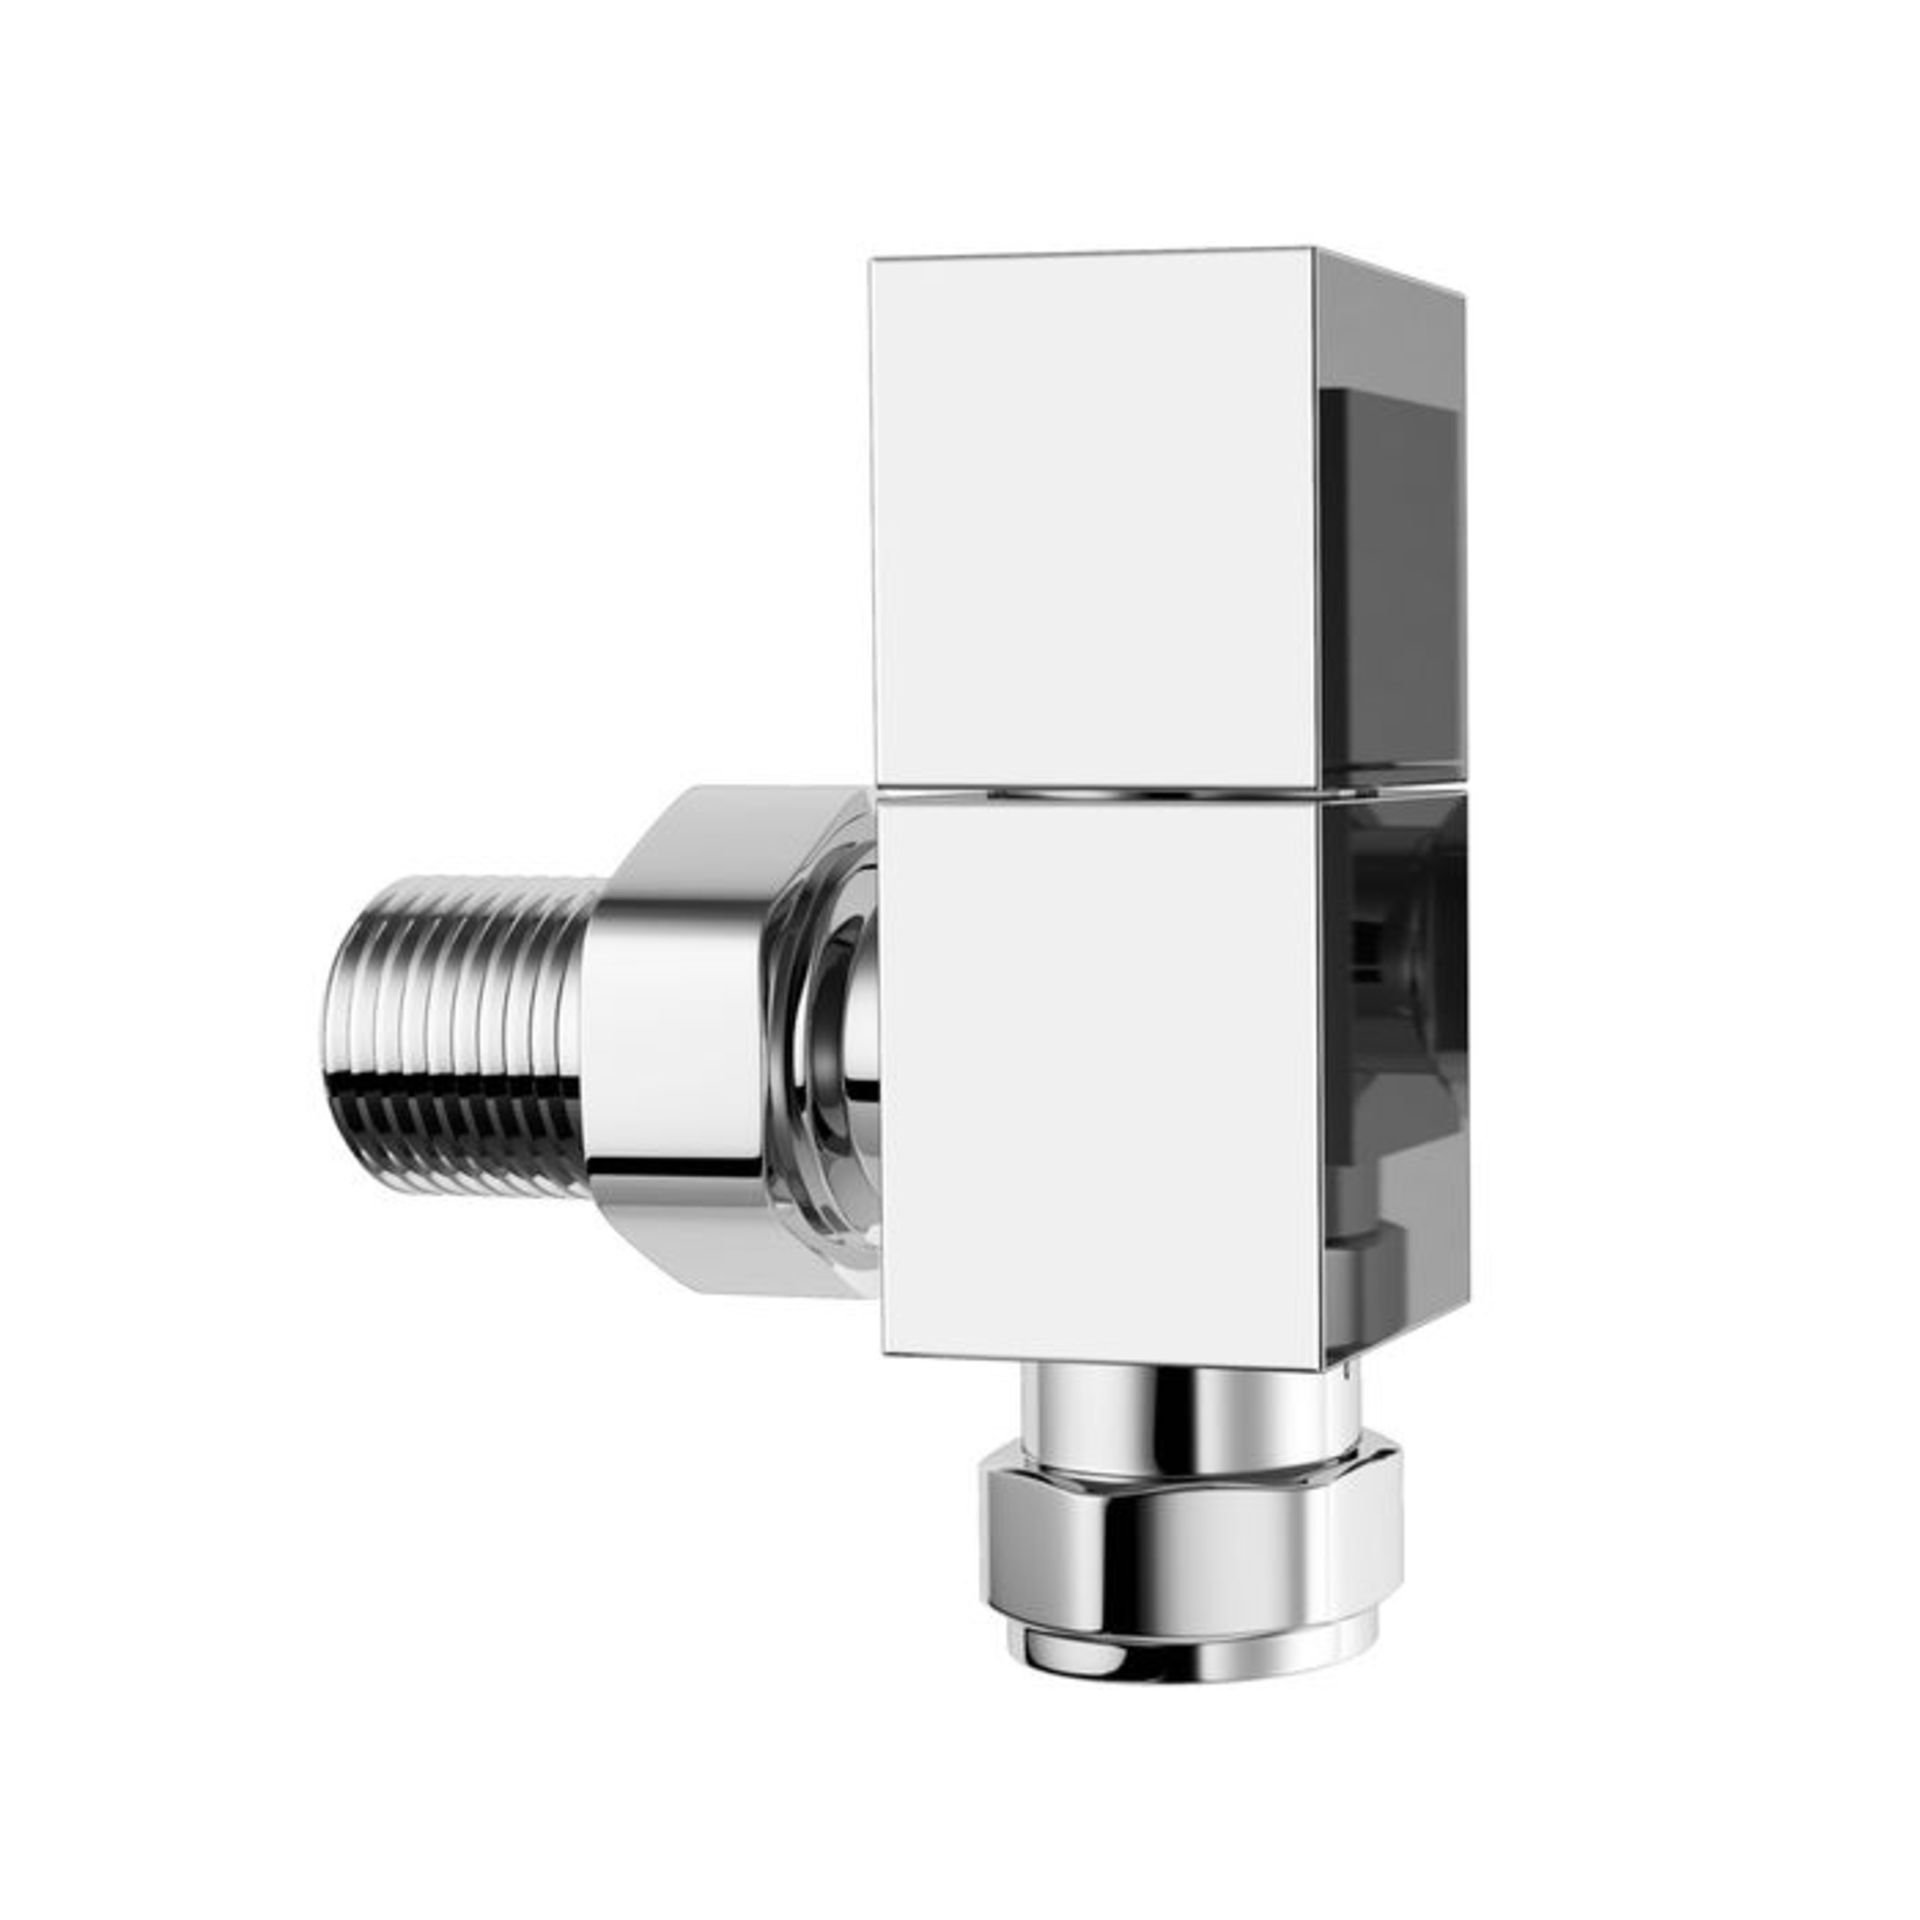 (G150) 15mm Standard Connection Square Angled Chrome Radiator Valves Specifications 100% leak tested